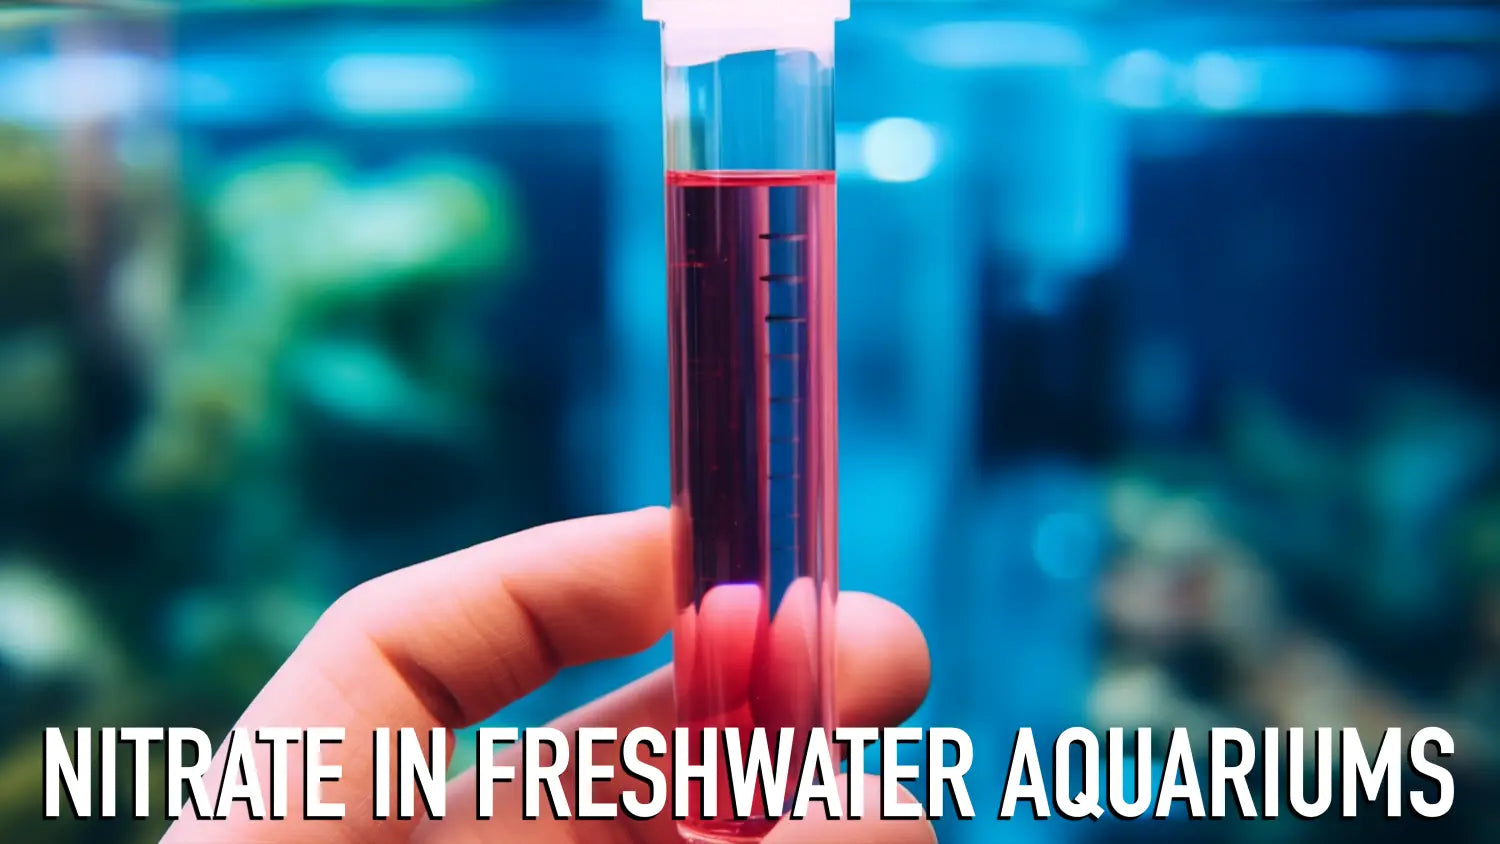 Nitrate in Freshwater Aquariums: Sources, Significance, and Solutions